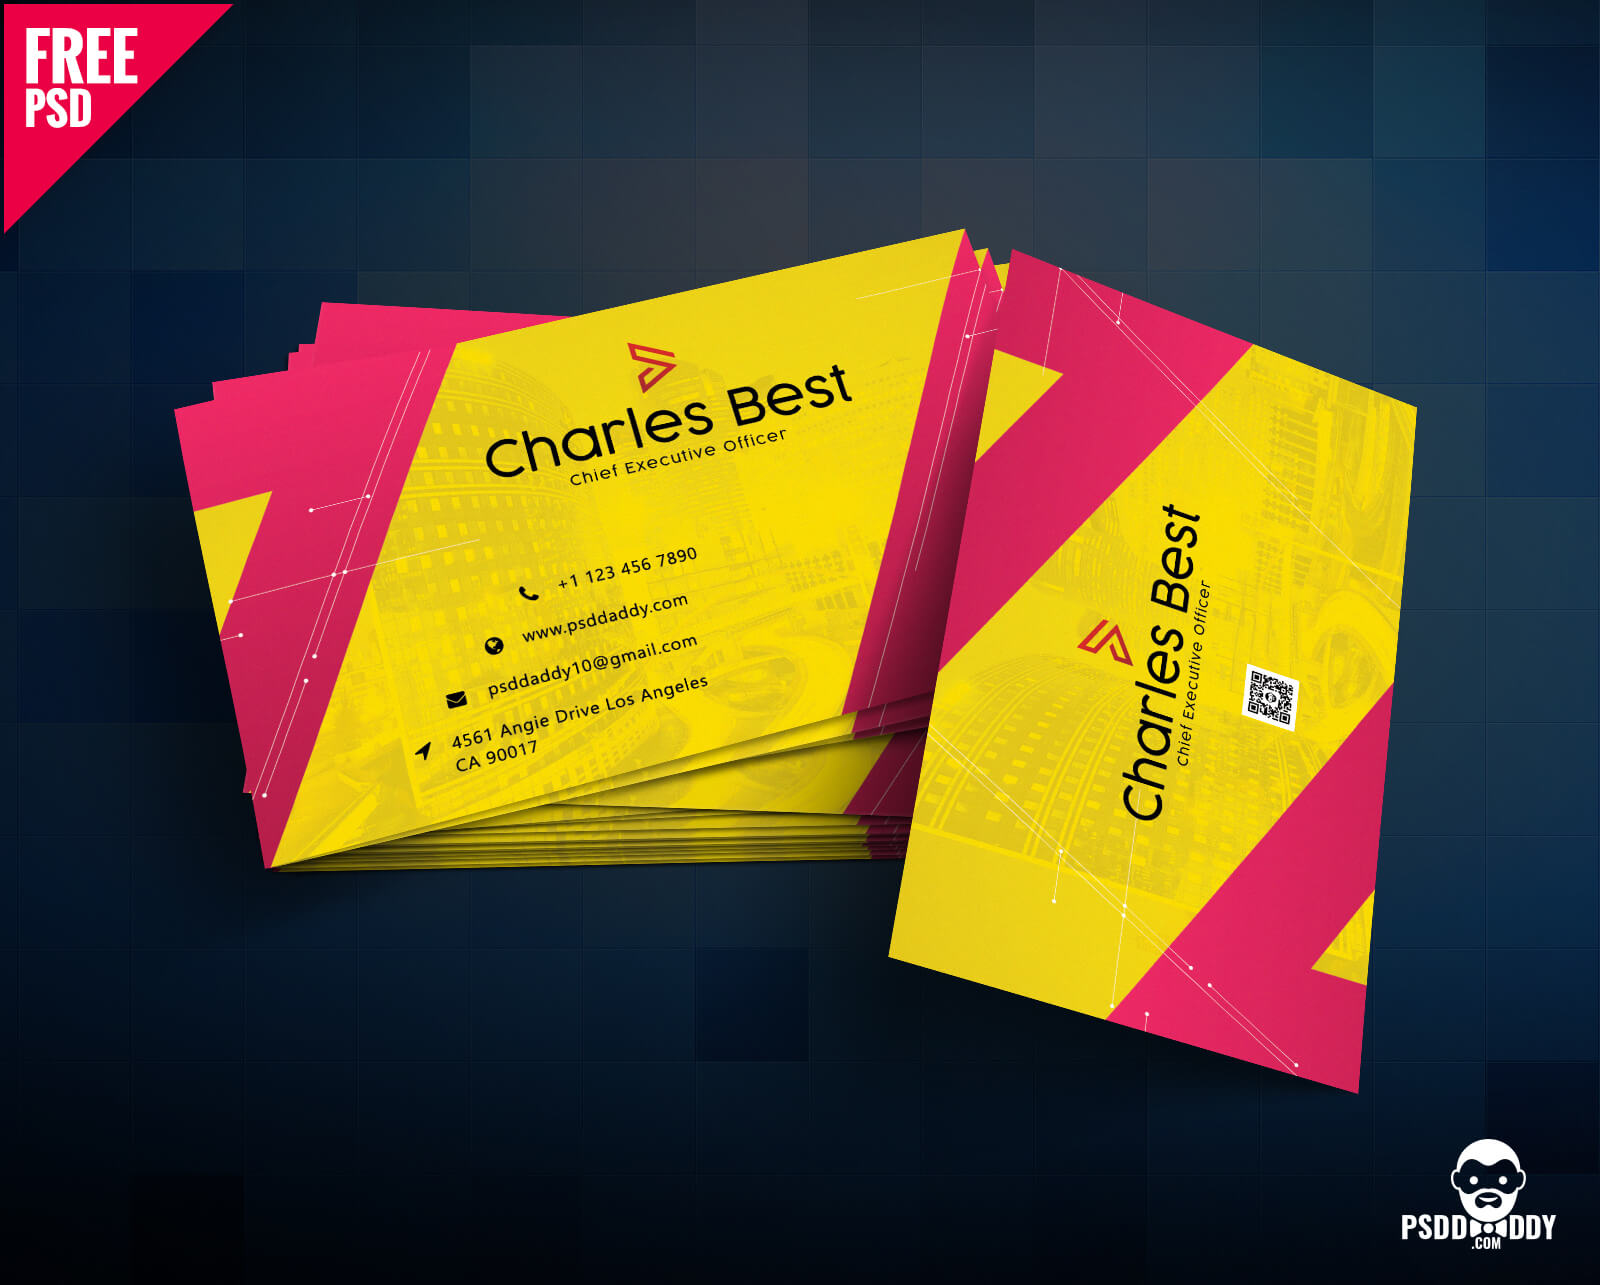 Download] Creative Business Card Free Psd | Psddaddy Pertaining To Visiting Card Templates For Photoshop